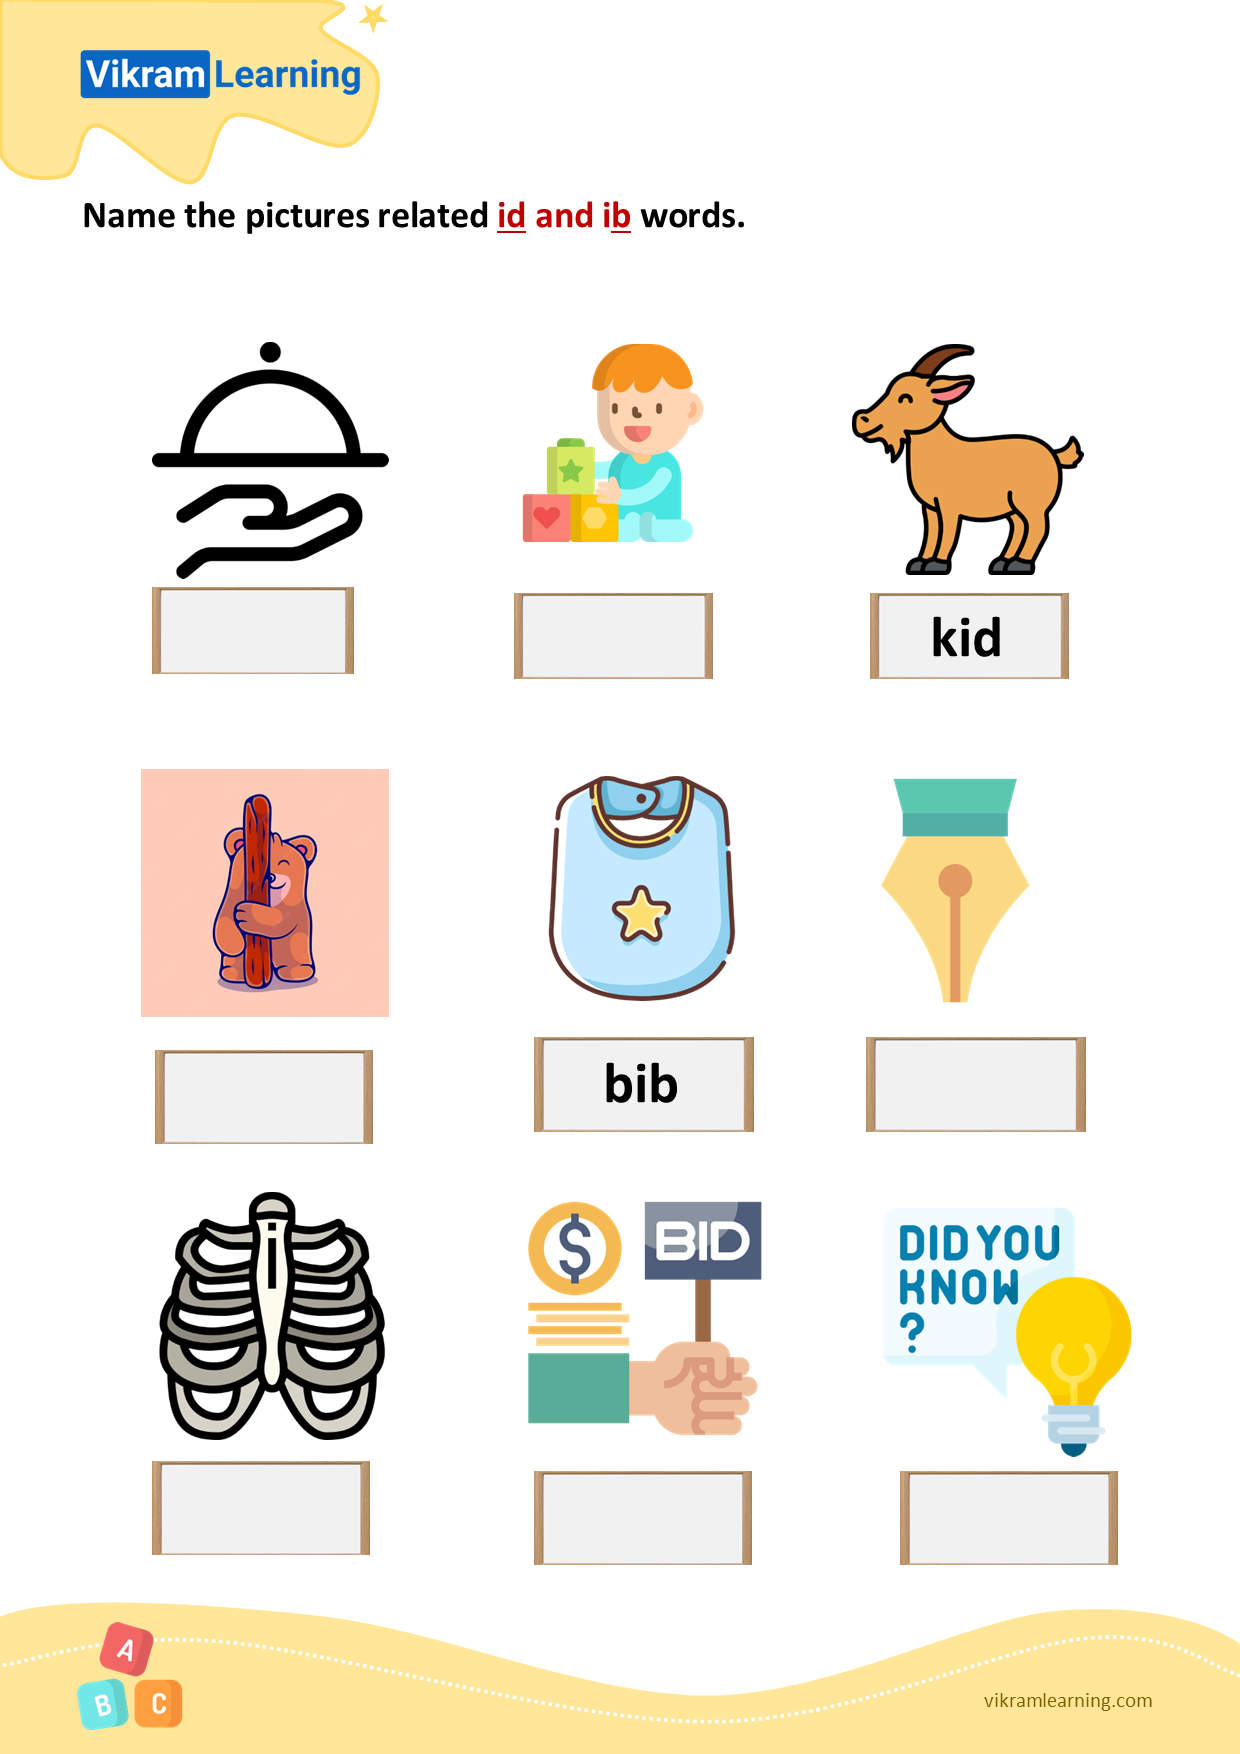 download-name-the-pictures-related-id-and-ib-words-worksheets-vikramlearning